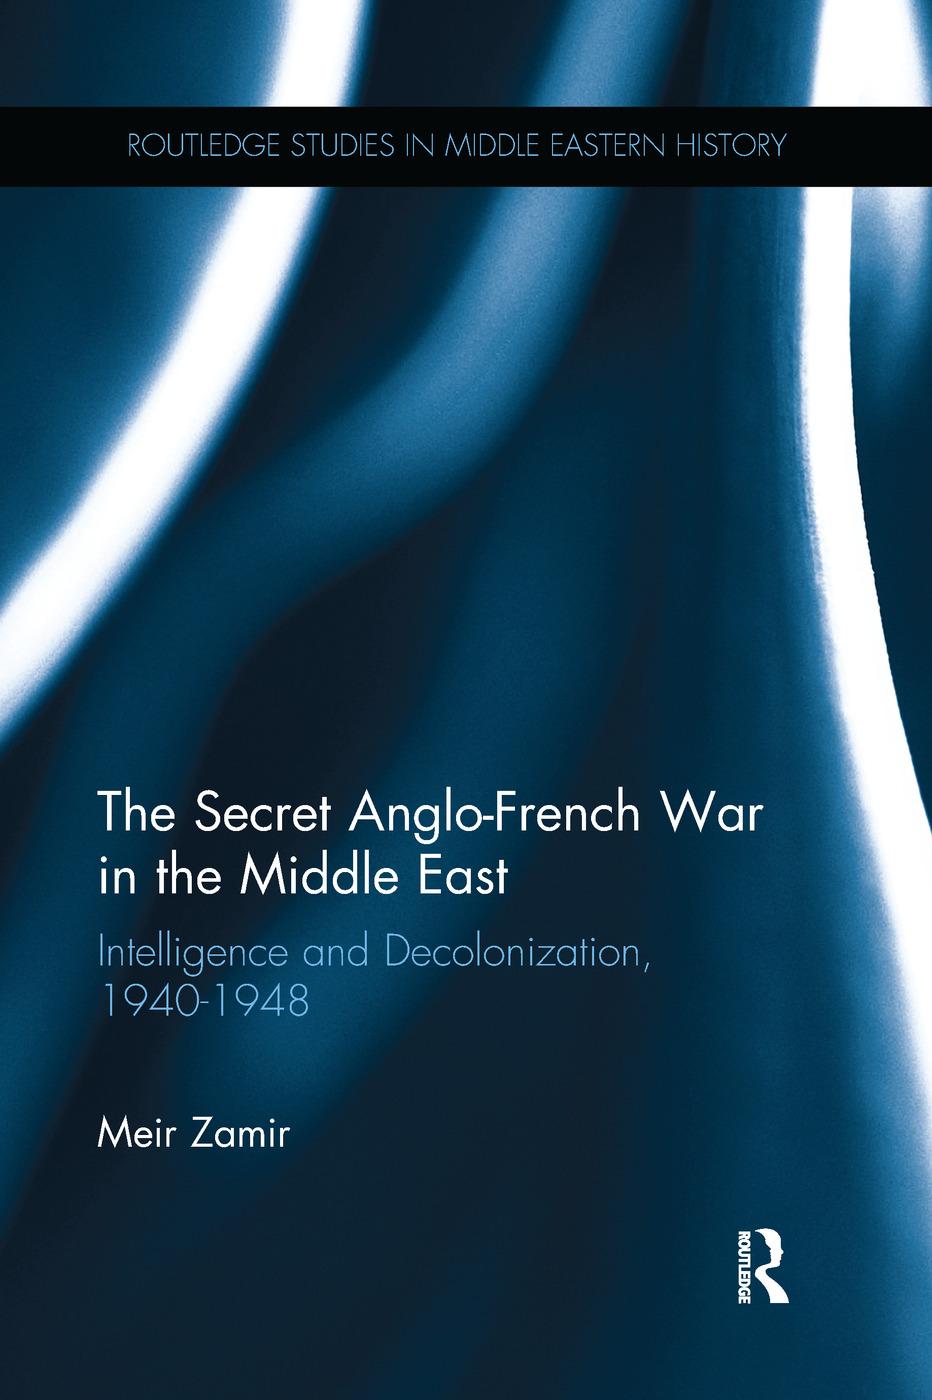 Zamir, M: The Secret Anglo-French War in the Middle East - Meir Zamir (Ben-Gurion University of the Negev, Israel)